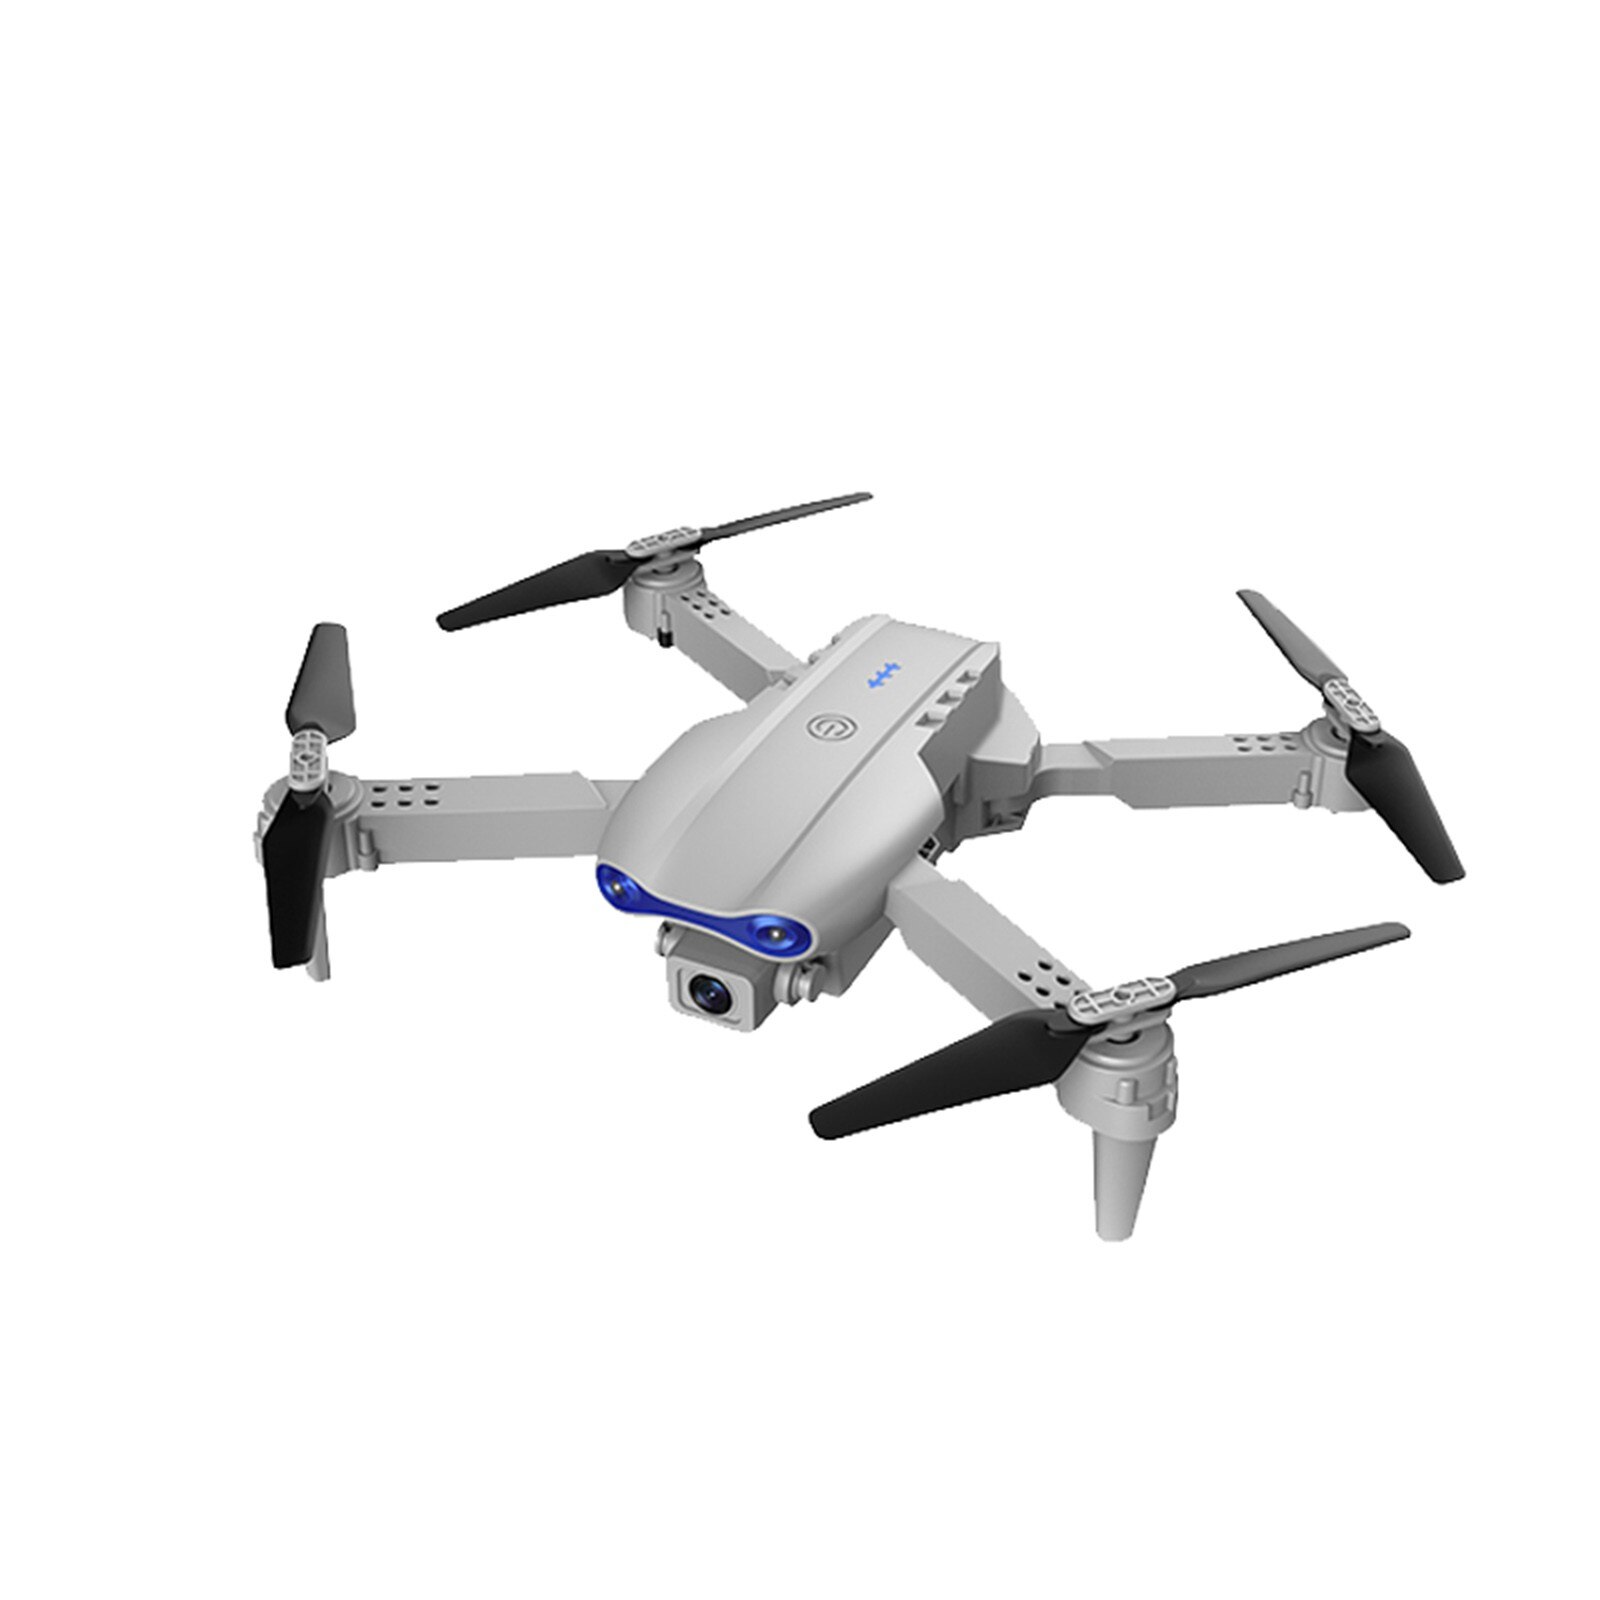 Mini-drone 4k Hd Dual Camera Wifi Fpv Smart Selfie Rc Uav Foldable Helicopter Profesional Photography Quadcopter Rc Dron Toys: Gray 